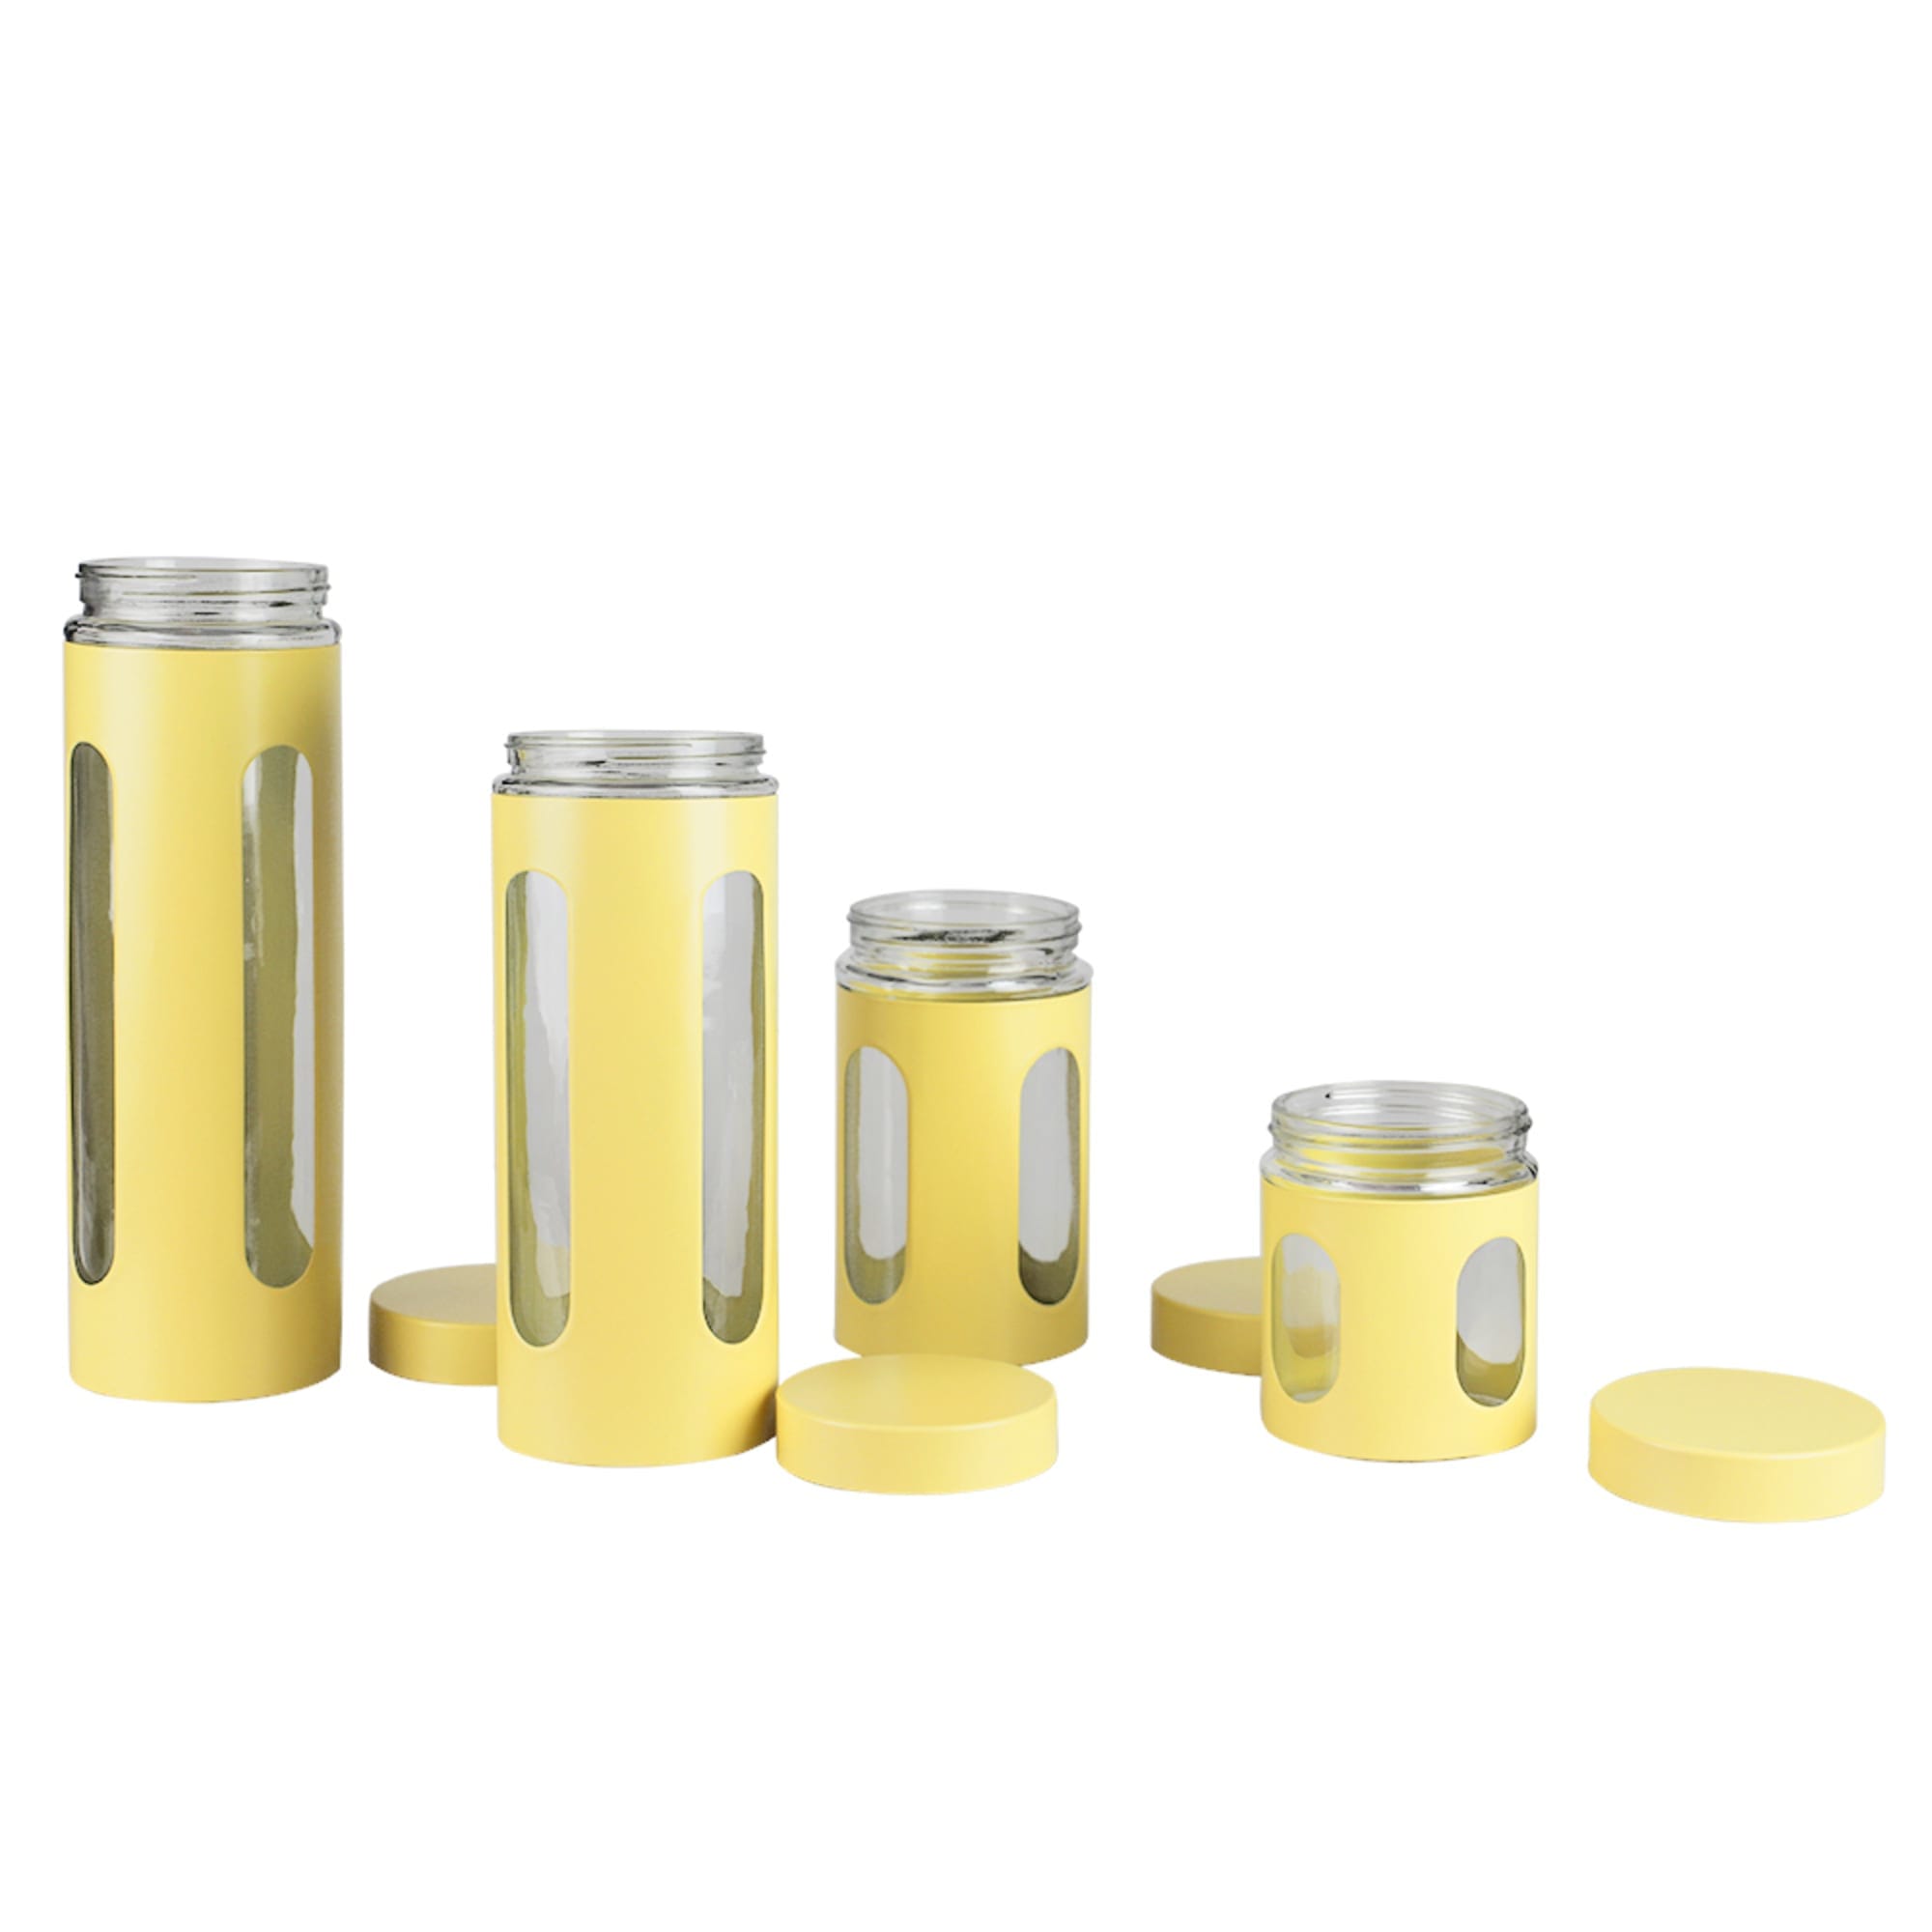 Home Basics 4 Piece Stainless Steel Canisters with Multiple Peek-Through Windows, Yellow $12.00 EACH, CASE PACK OF 4